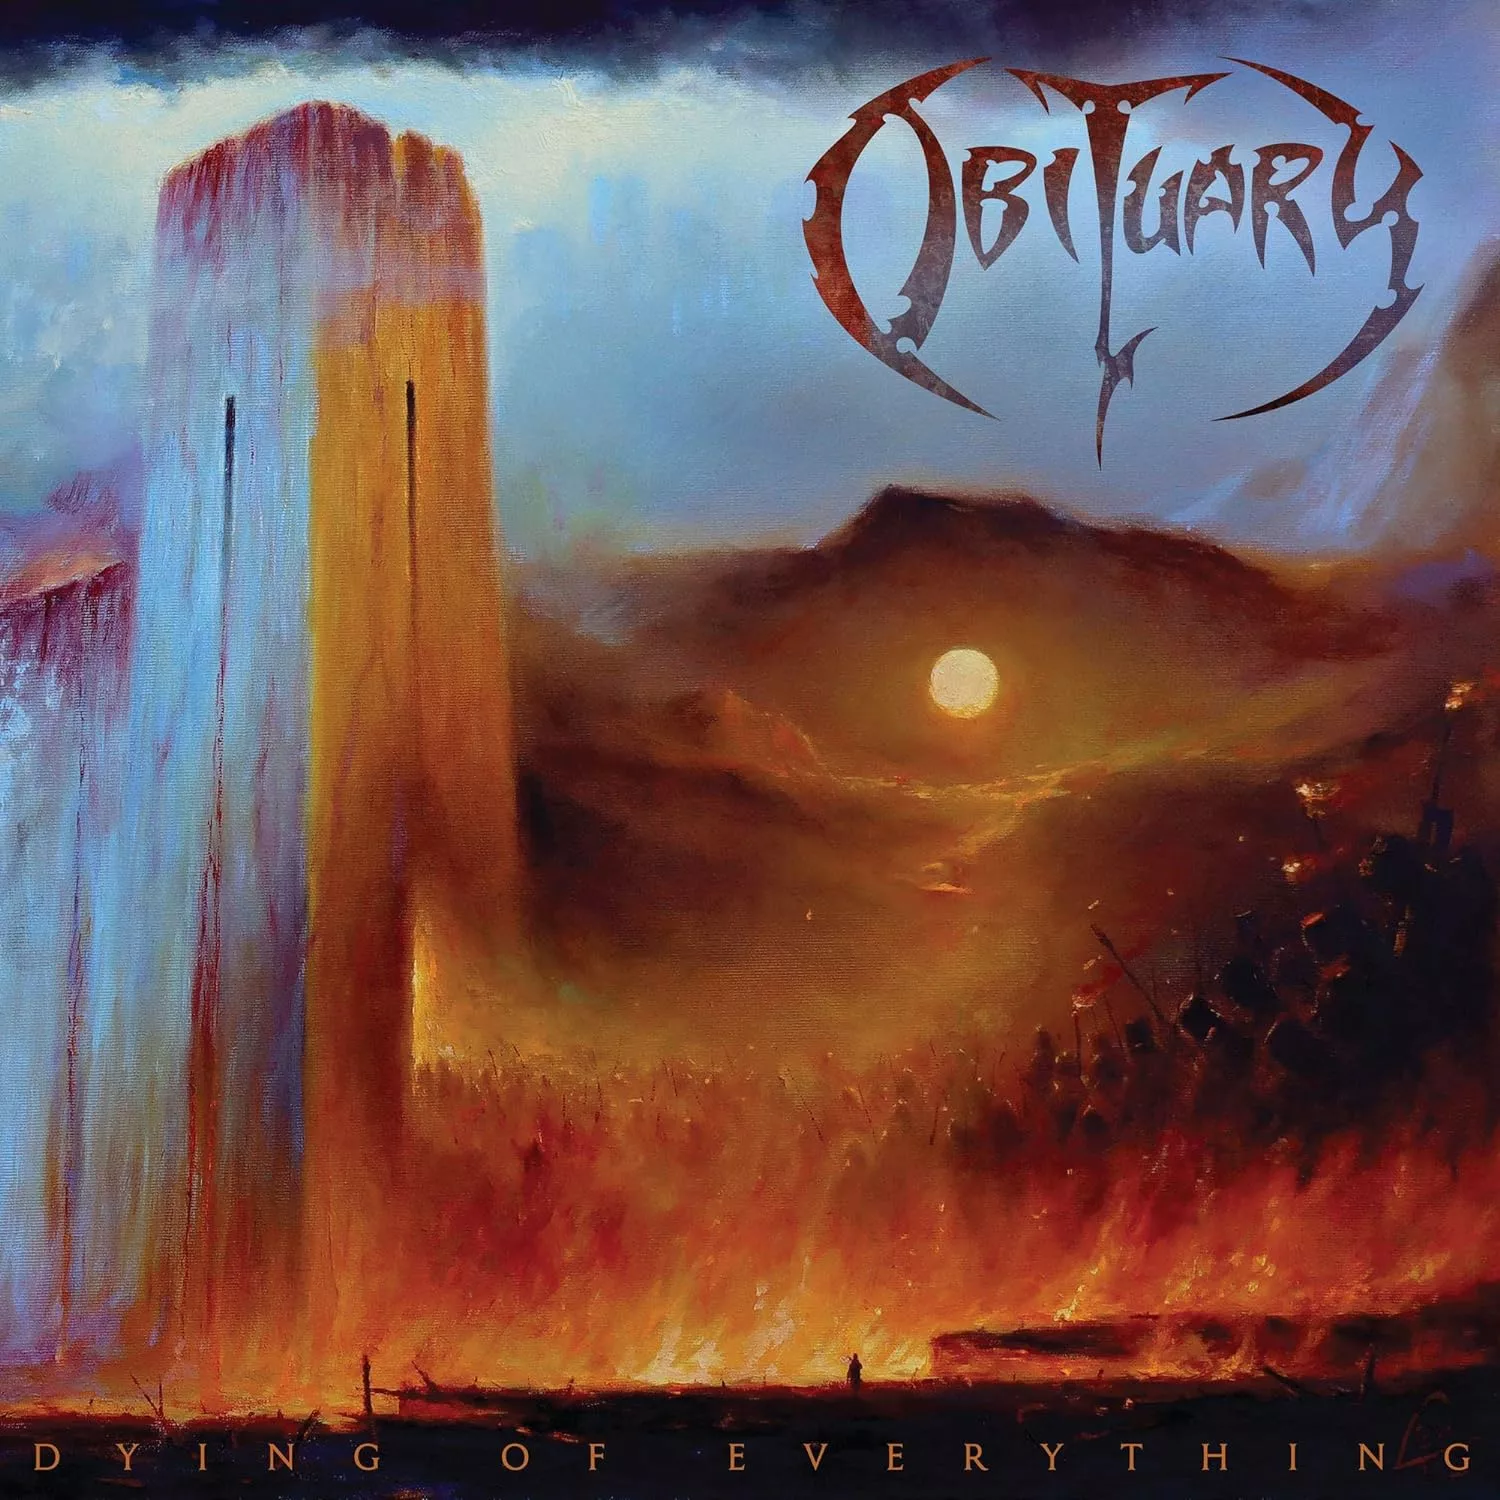 OBITUARY - Dying Of Everything [CD]